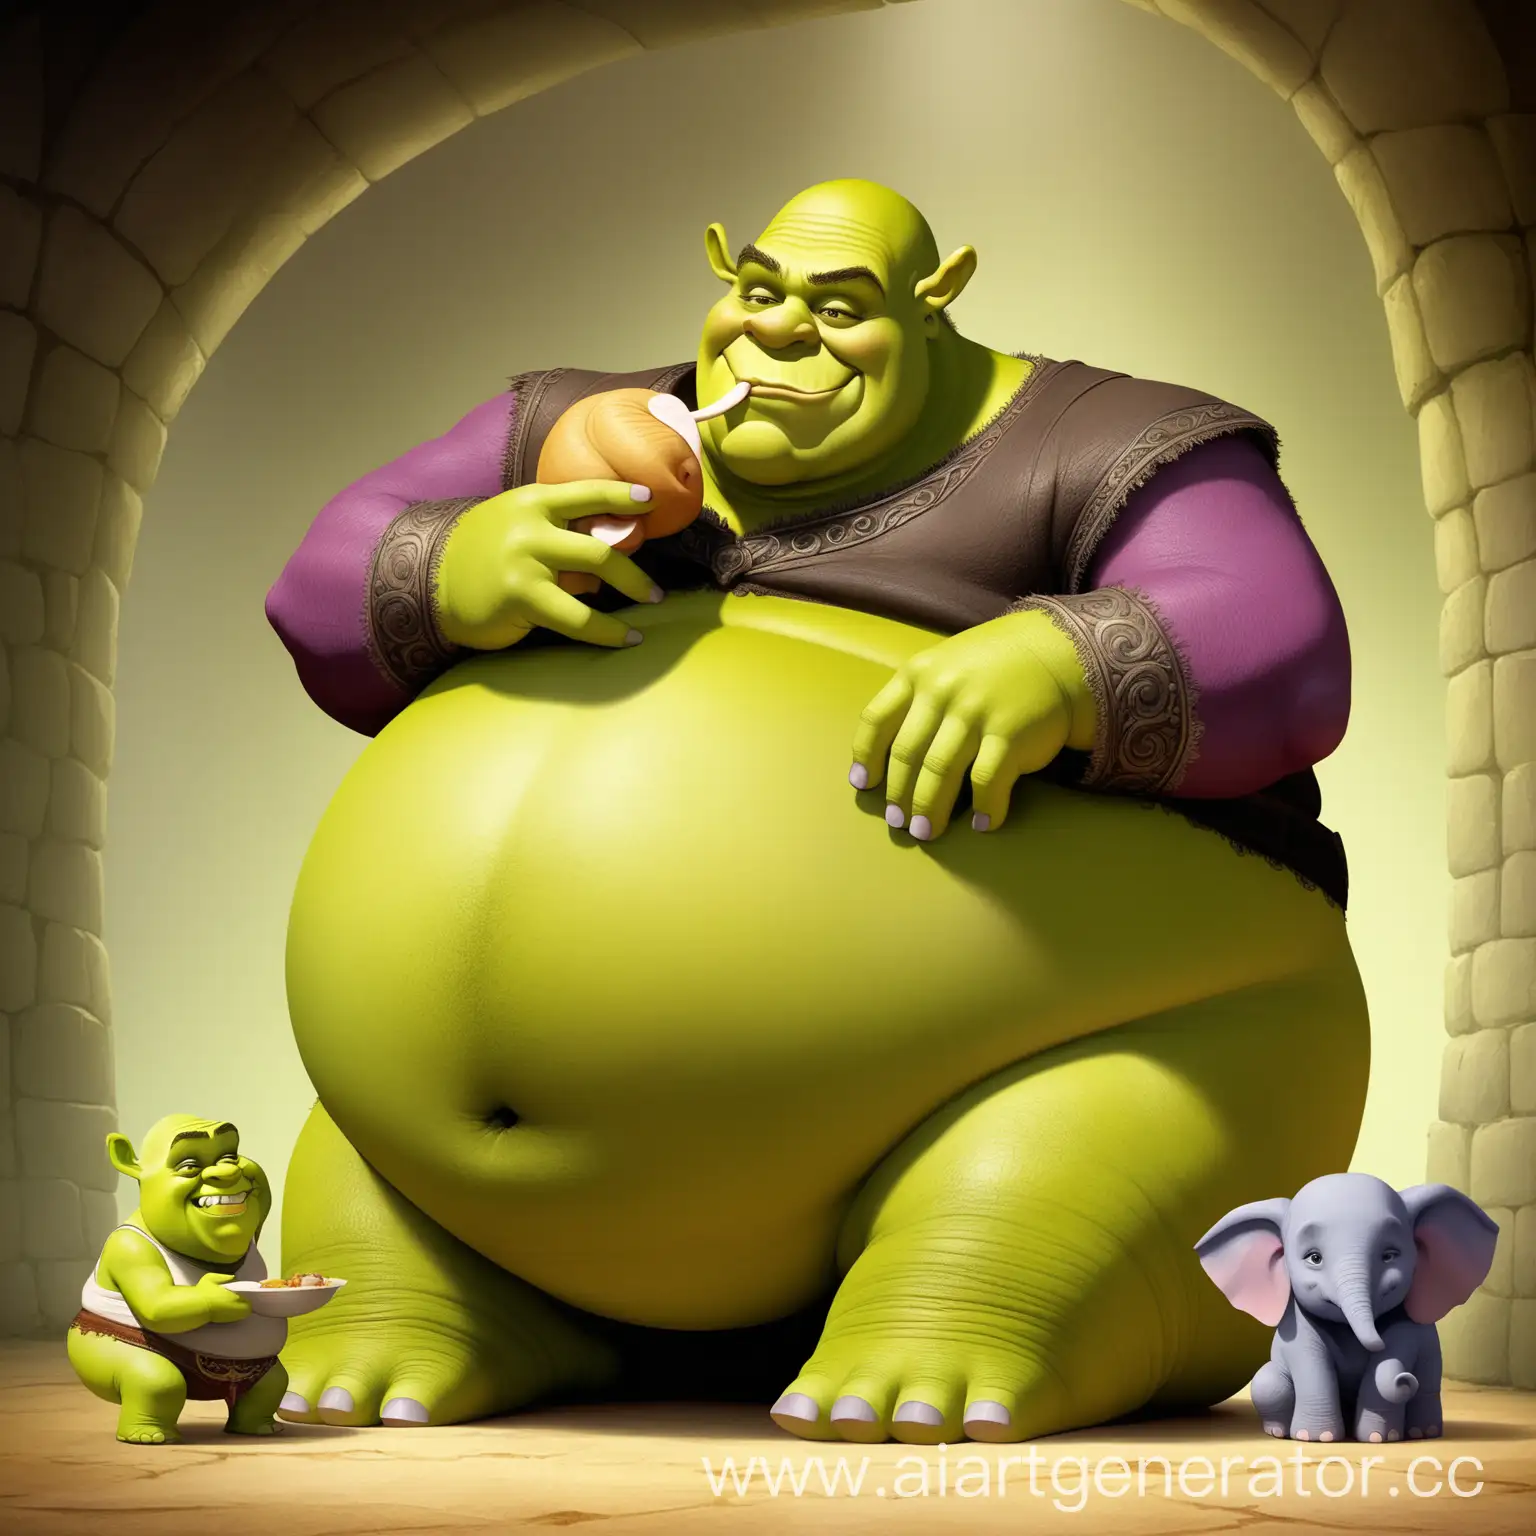 Cartoon-Ogre-with-Round-Belly-Eating-Miniature-Elephant